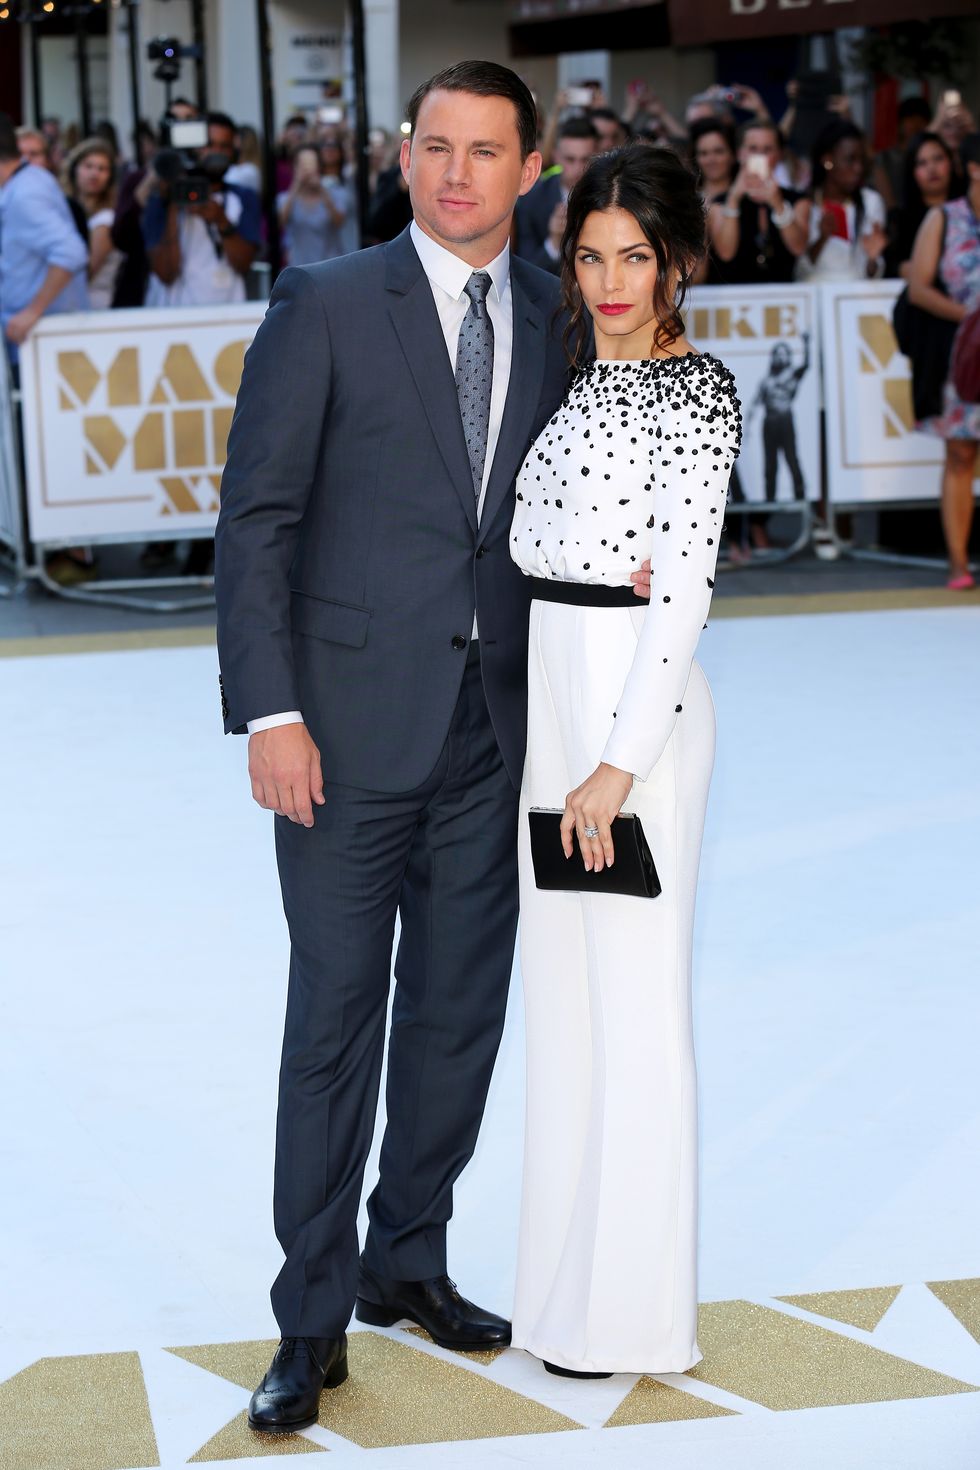 Channing Tatum and co. looked spectacular at the Magic Mike XXL London premiere, then